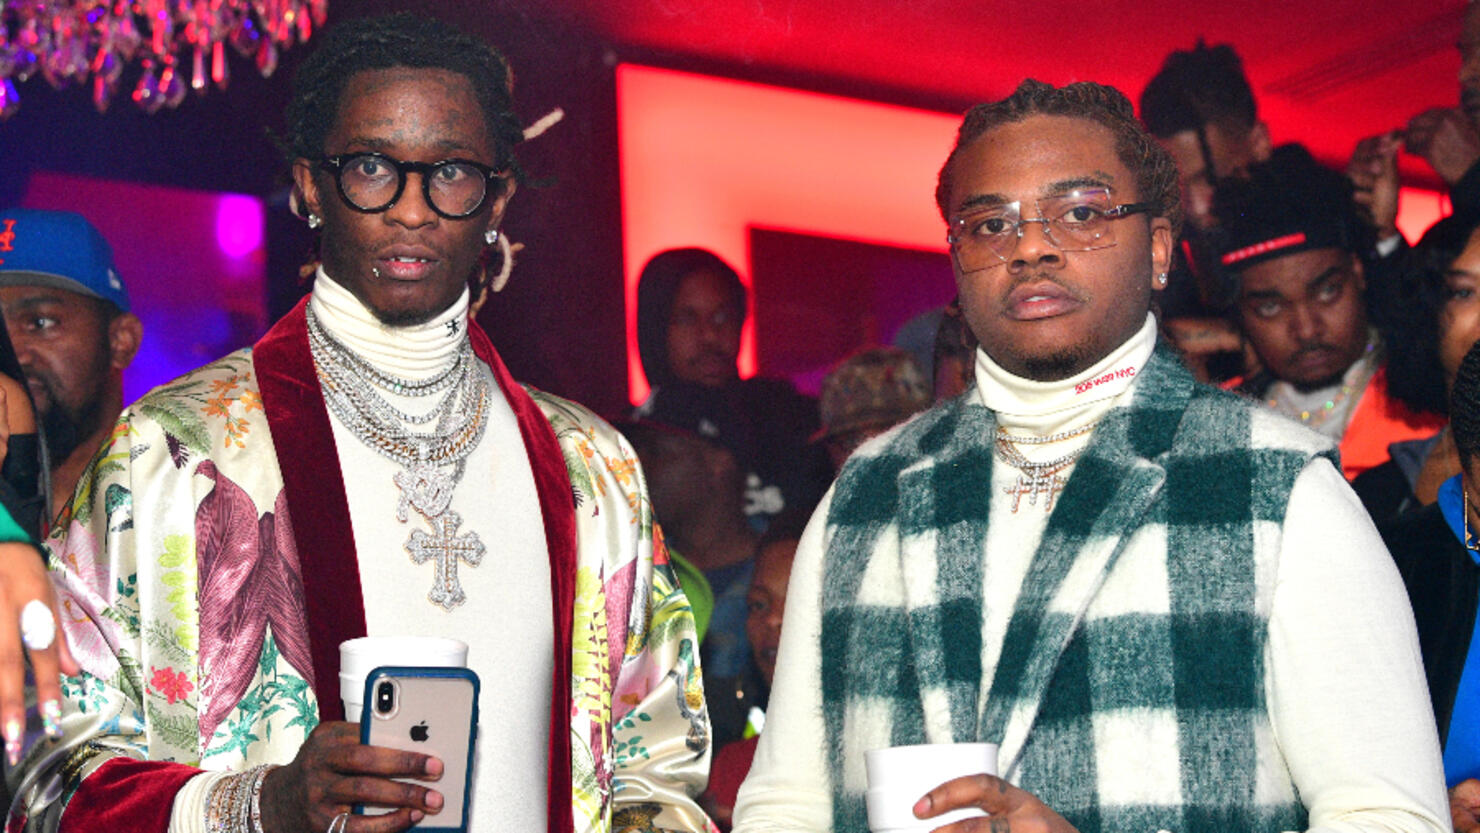 Young Thug & Gunna Post Bond For 30 People With Low-Level Offenses |  iHeartRadio